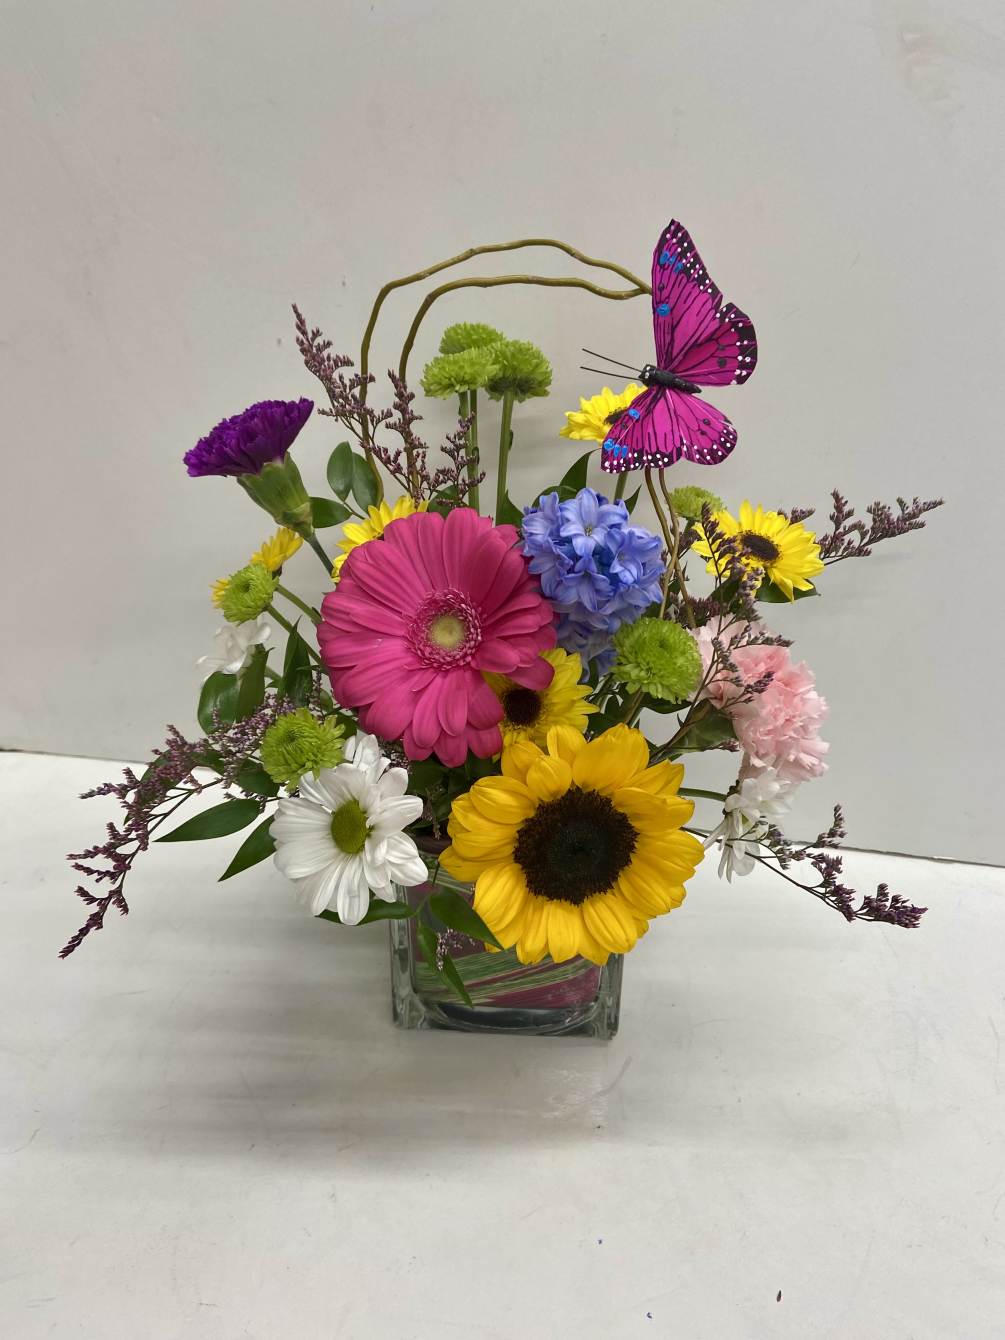 Hippy Psychedelic confetti colors with gerbera daisies, sunflowers, roses. carnations, green buttons